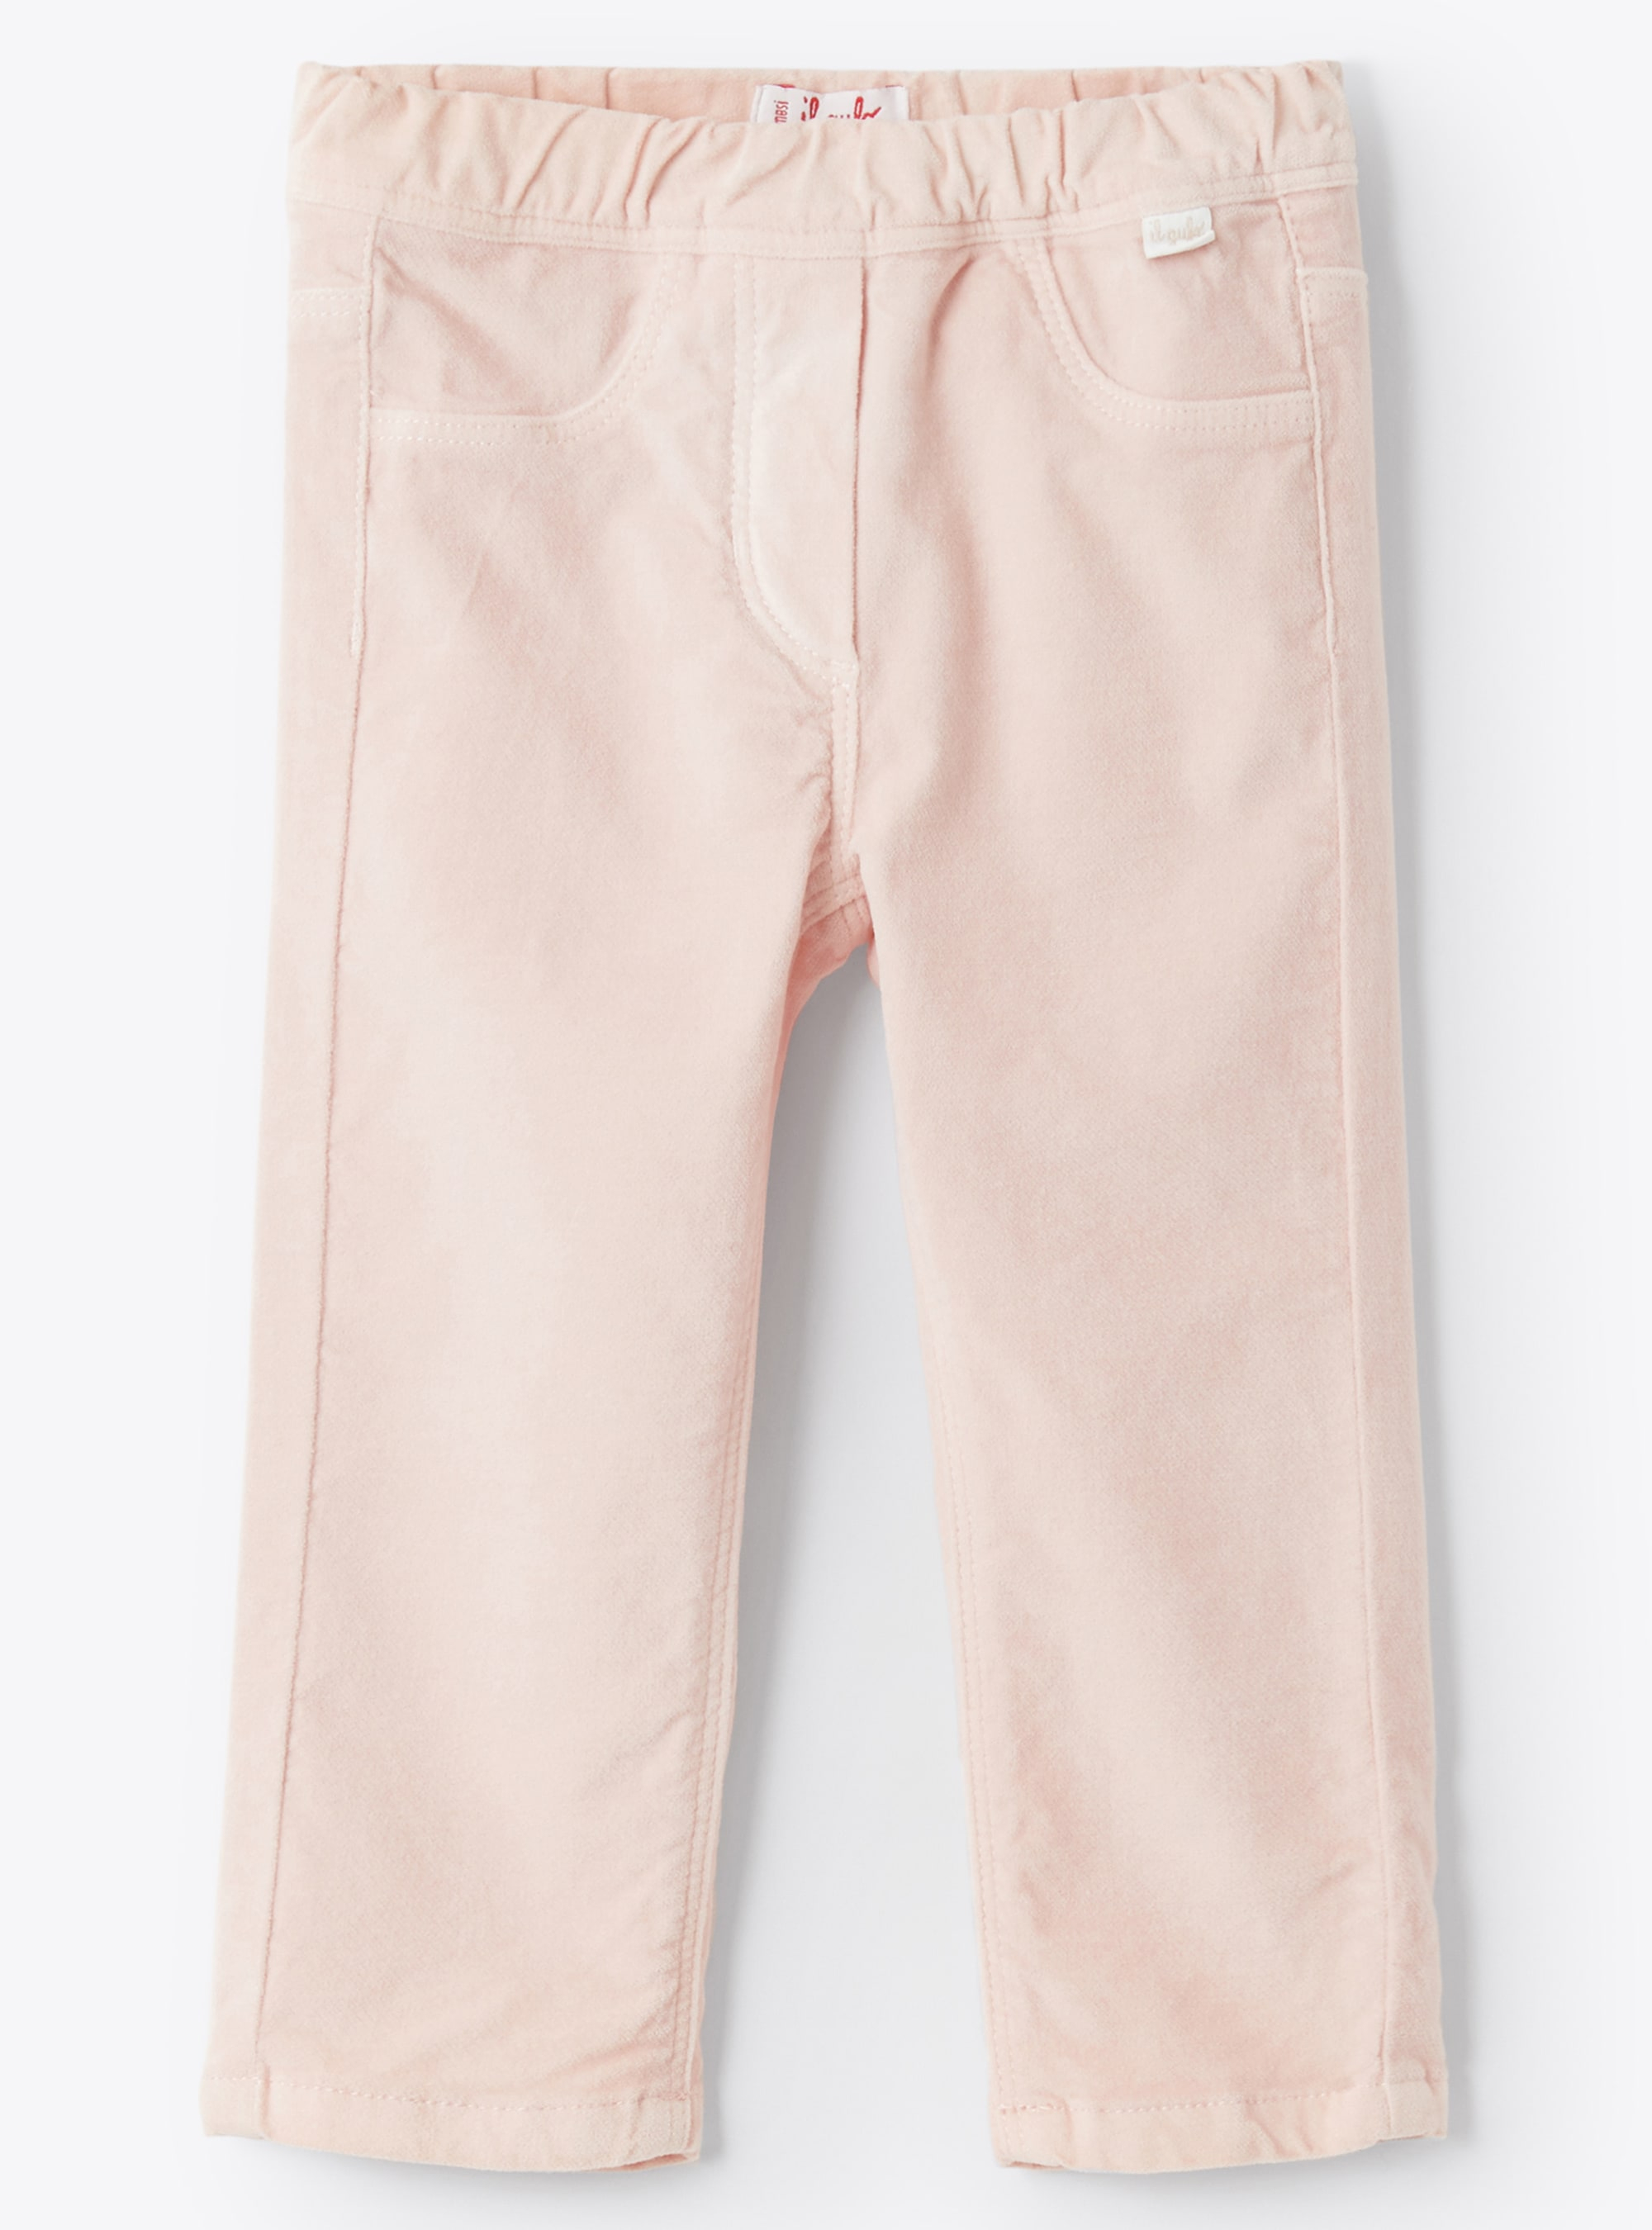 Skinny pink velvet trousers - Trousers - Il Gufo